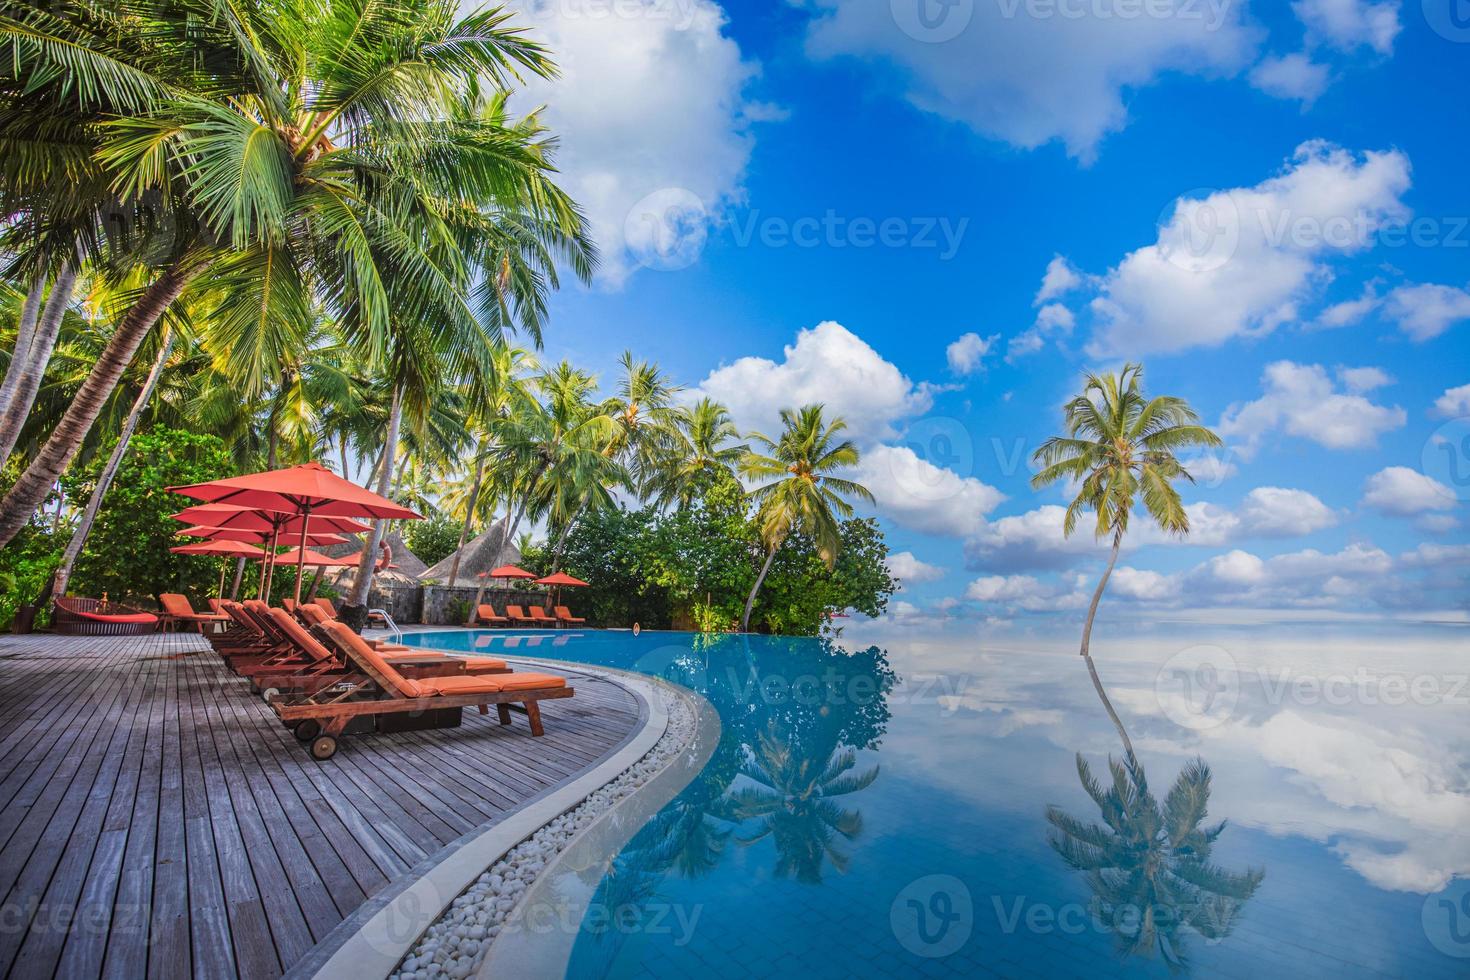 Panoramic holiday landscape. Luxurious beach resort hotel swimming pool and beach chairs or loungers under umbrellas with palm trees, blue sunny sky. Summer island seaside, travel vacation background photo